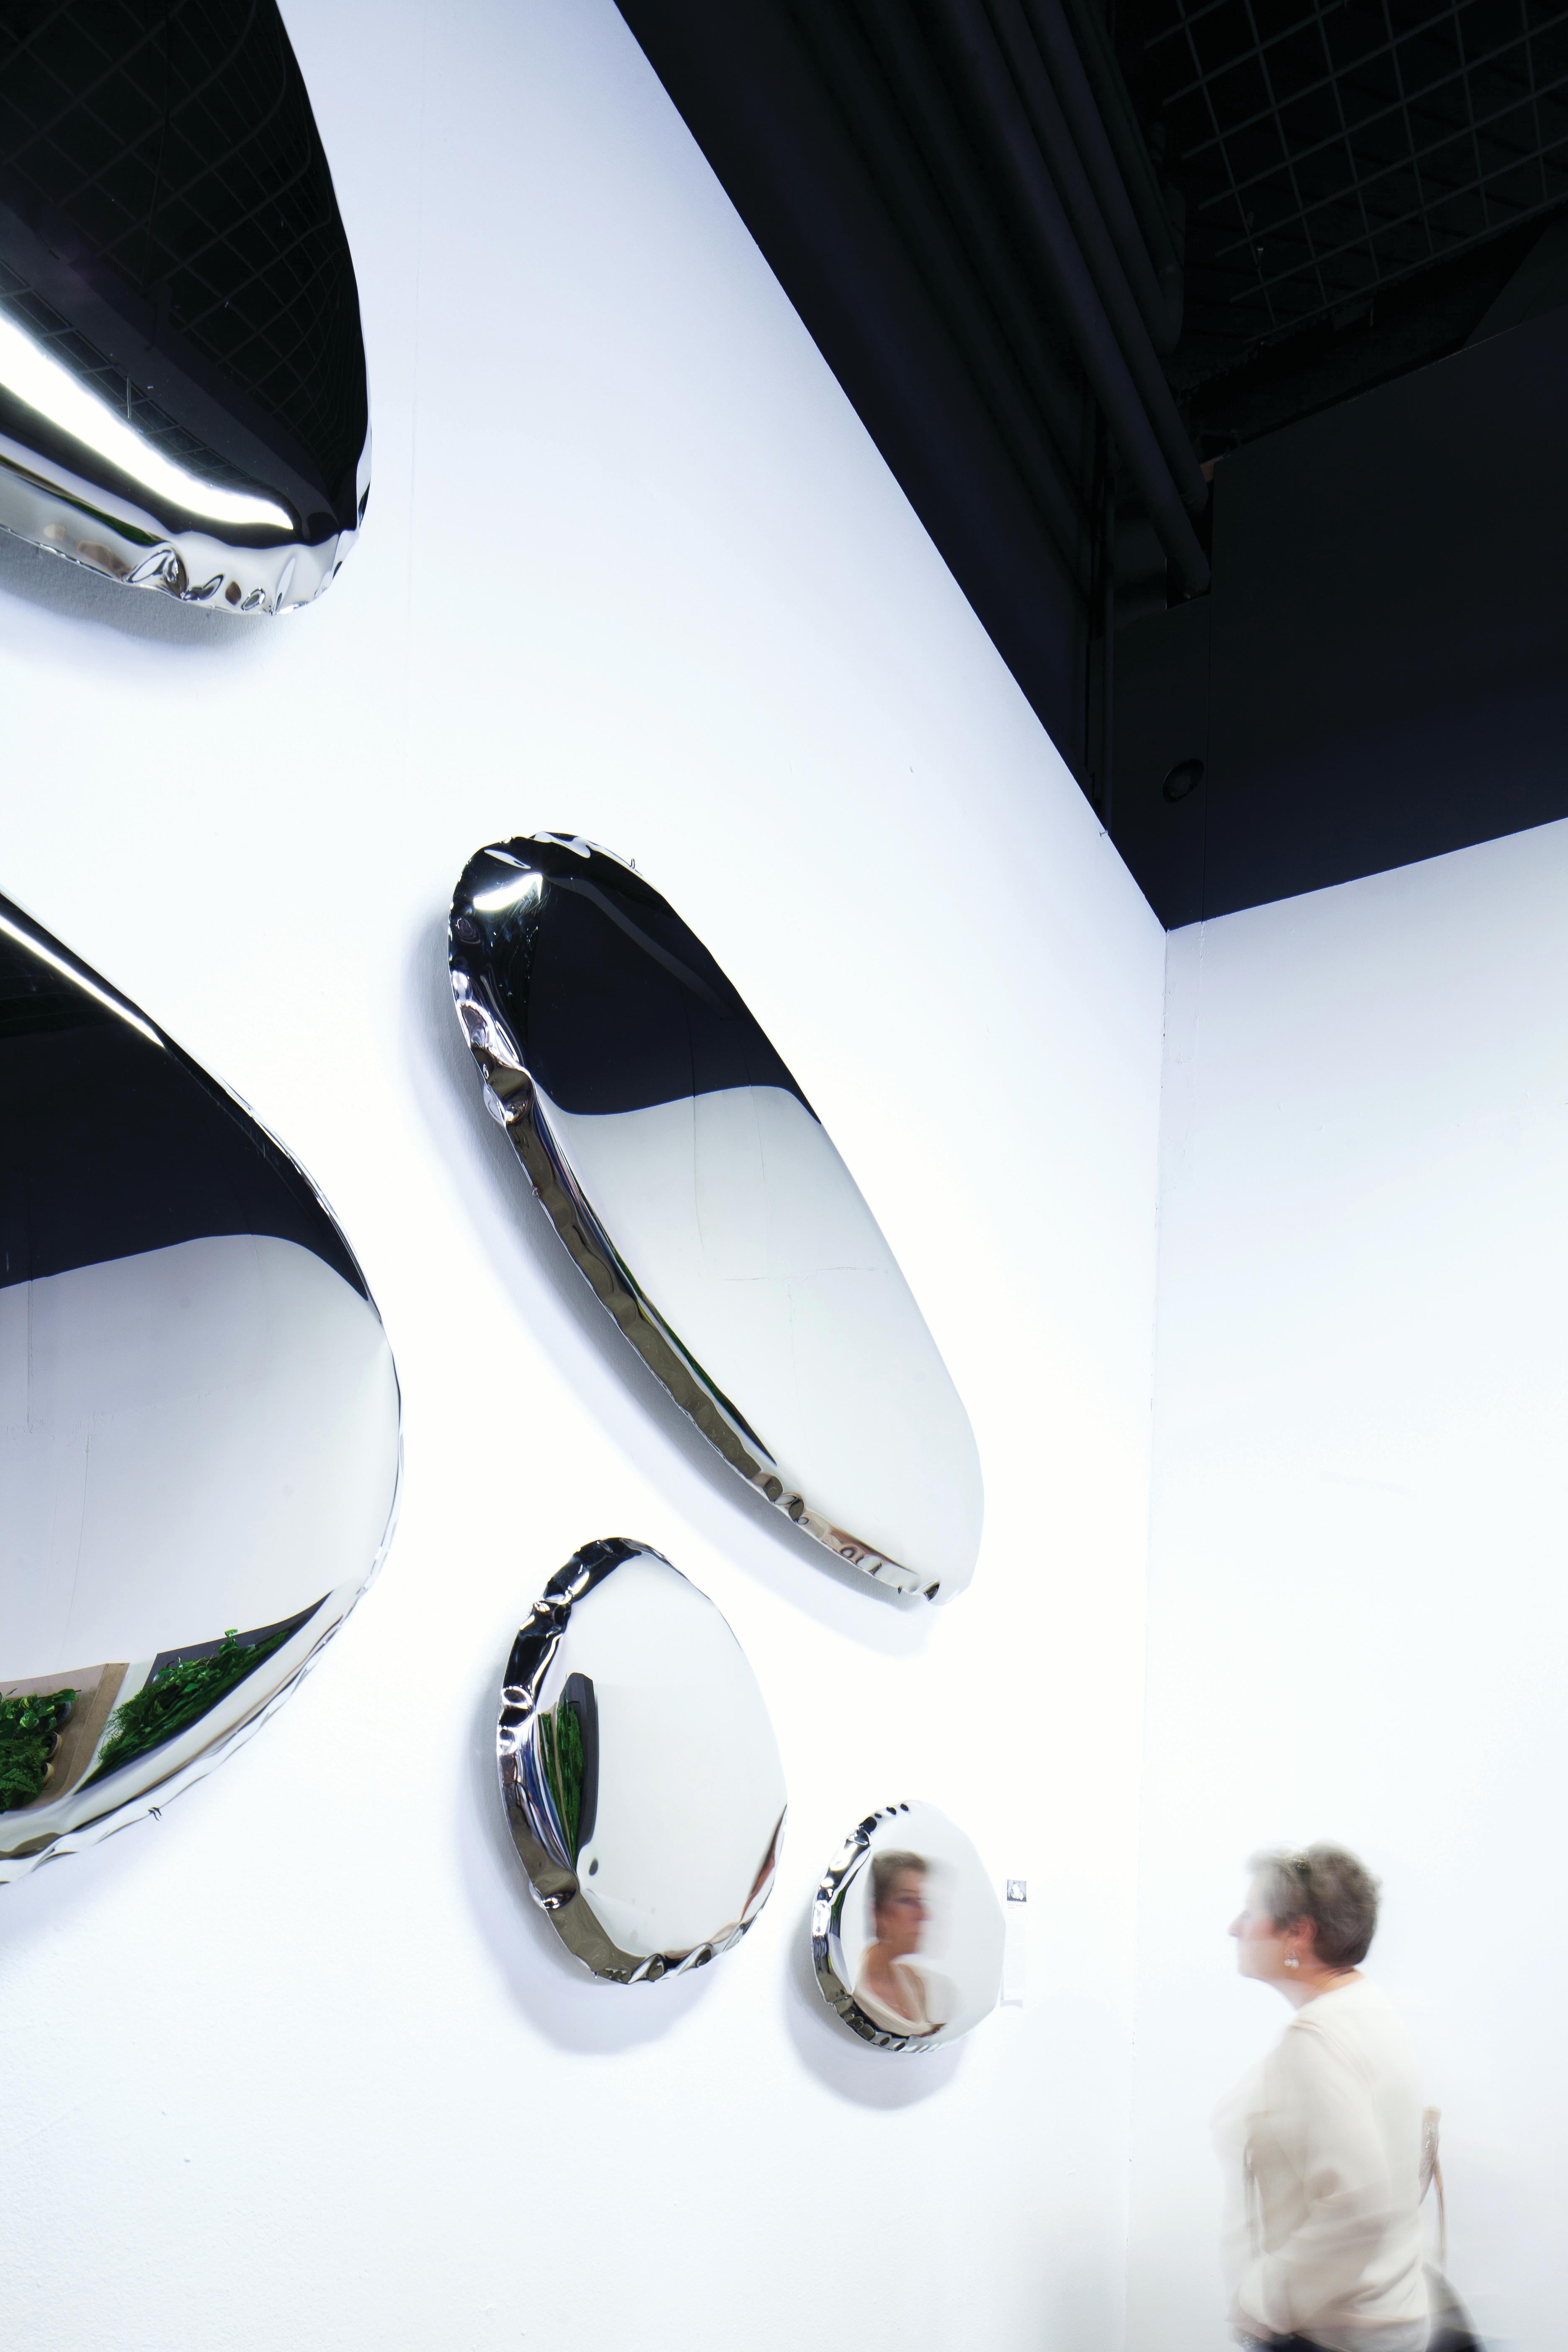 Tafla O series is characterized by smooth, optically light shapes inspired by liquid droplets and thanks to its unique form, combines the world of design, art, and technology.